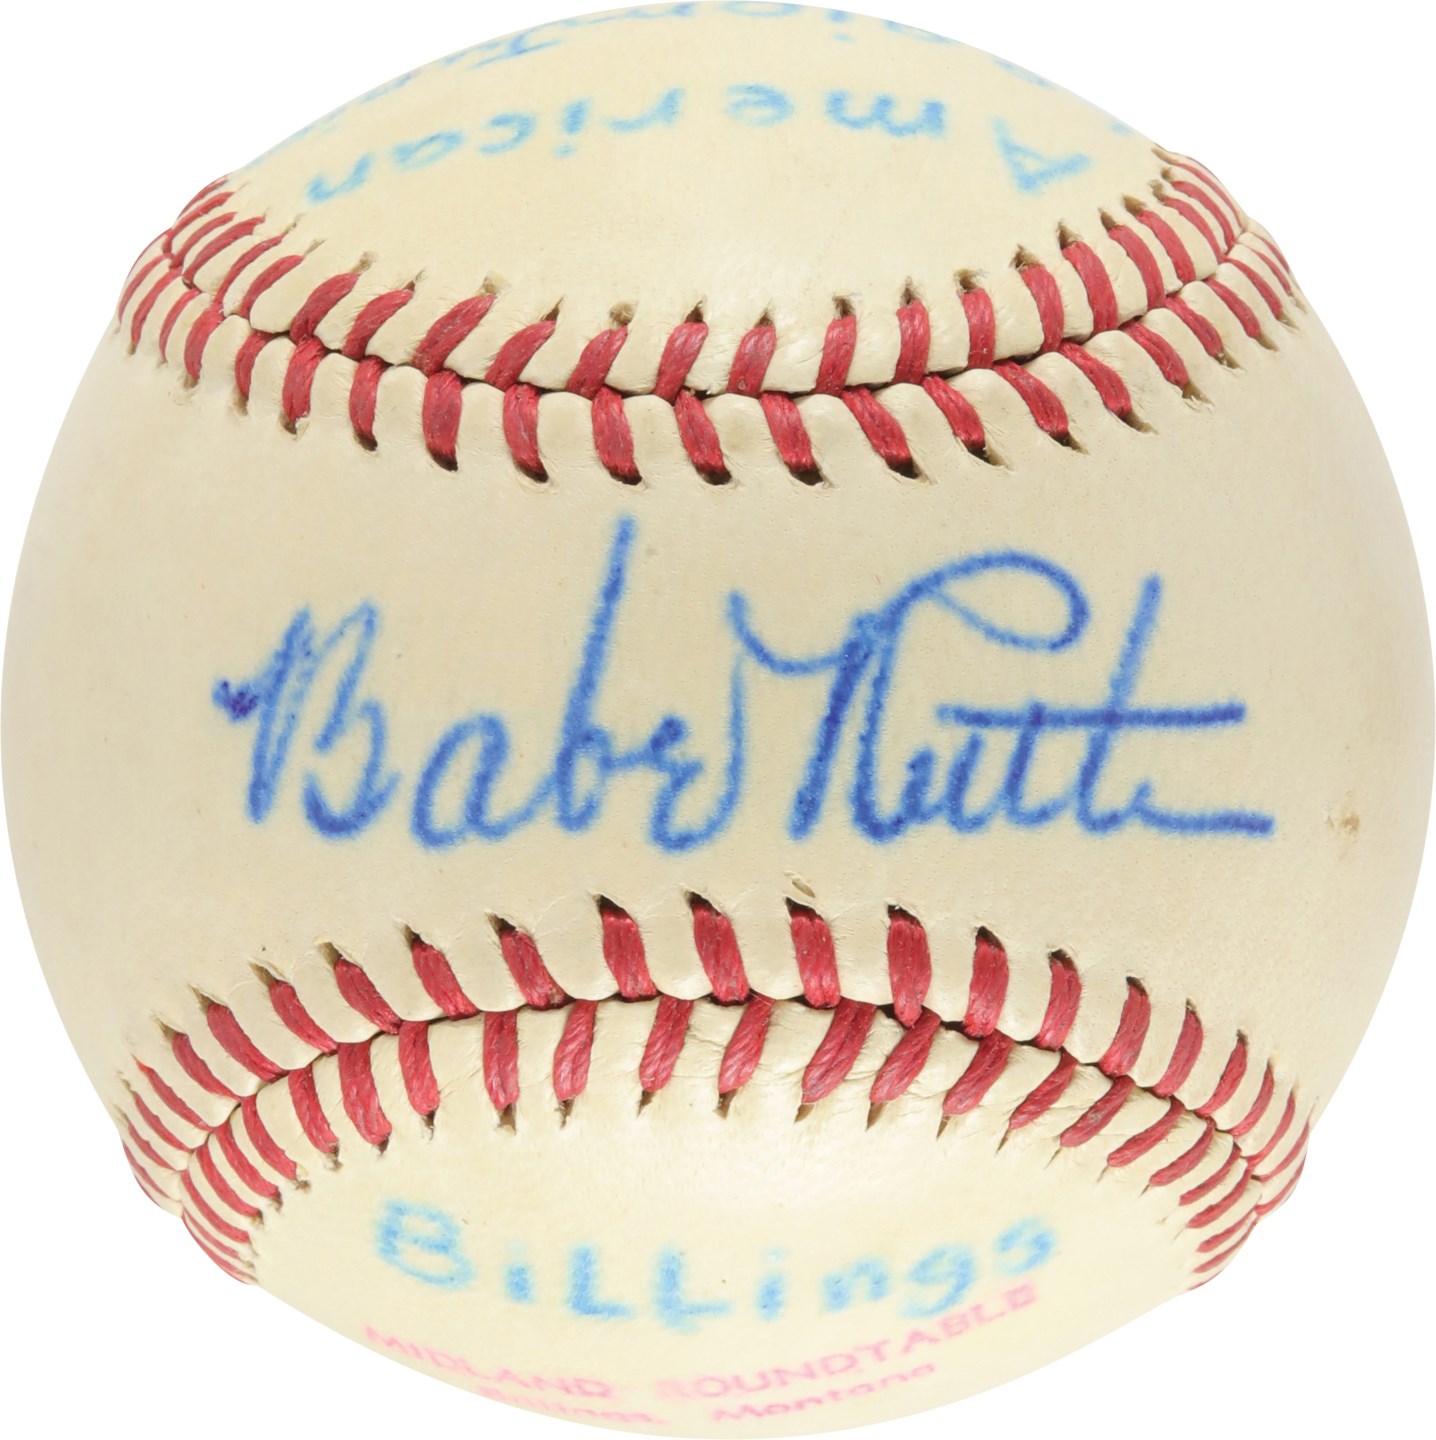 - unning 1947 Babe Ruth Single-Signed Baseball with Impeccable Provenance (PSA MINT 9 Auto)